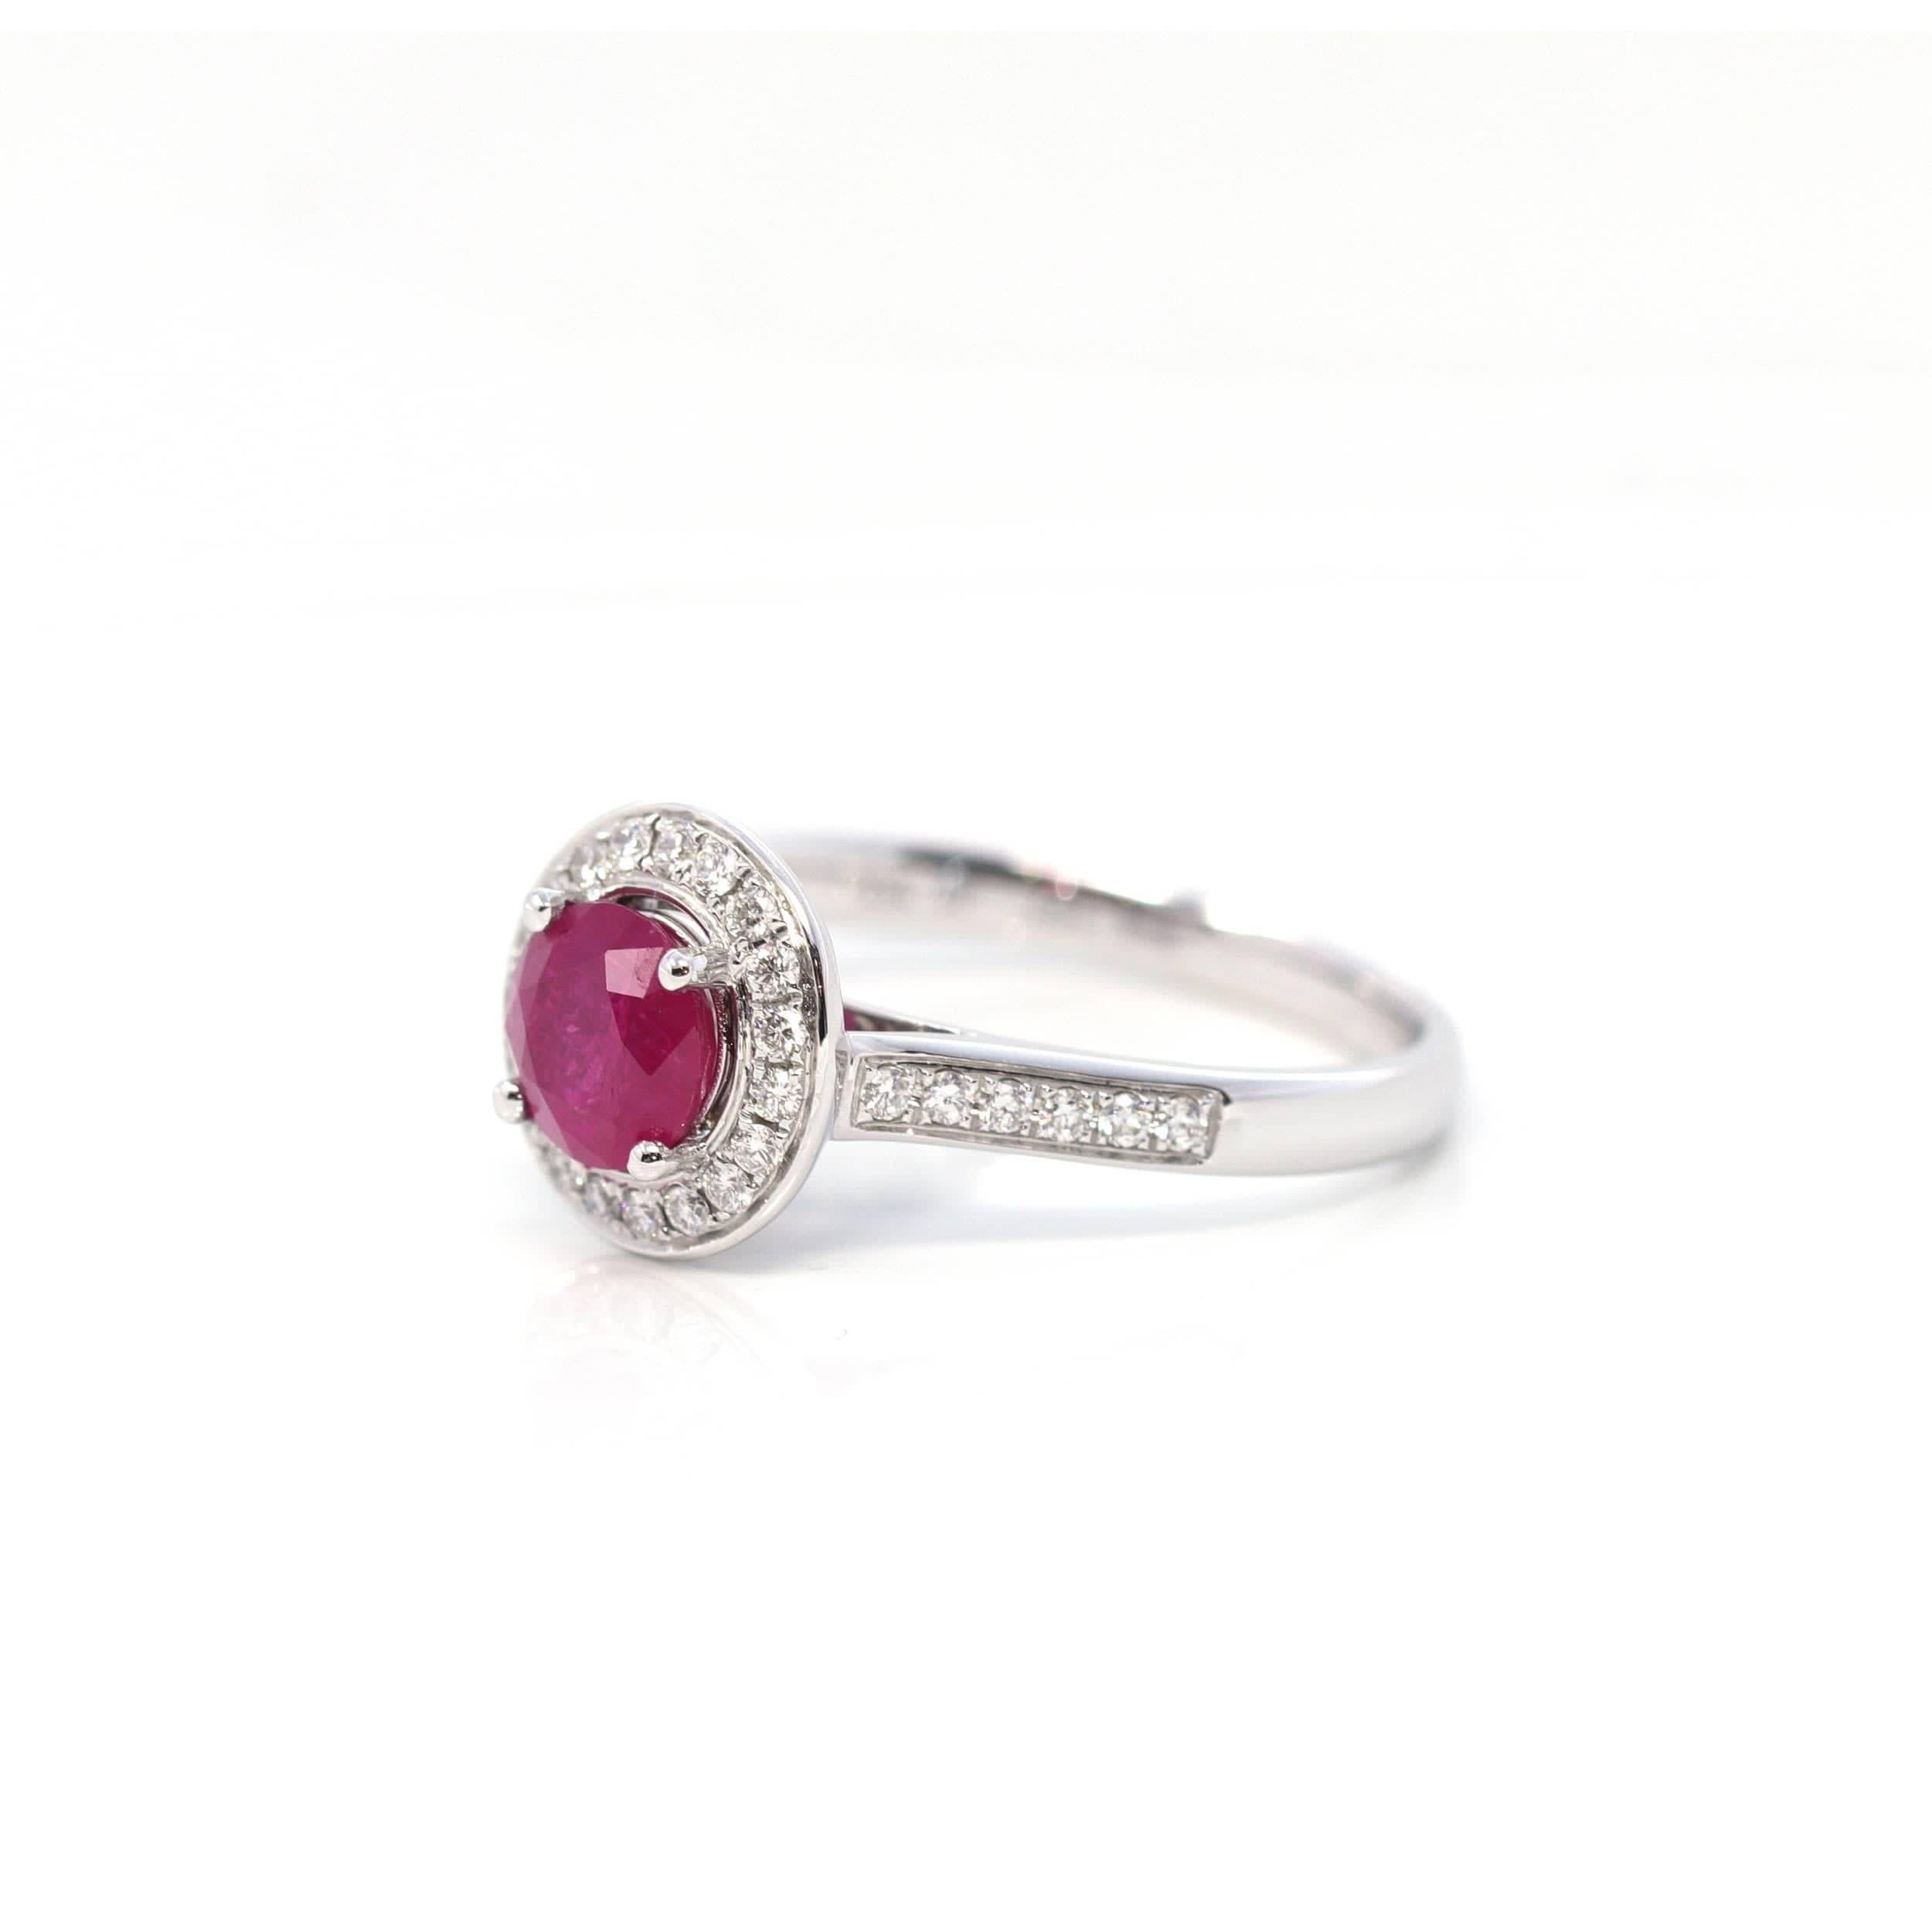 * Details--- Inspired by the natural beauty of genuine rubies. This anniversary ring combines the natural beauty of the gemstone with everyday luxury. Exquisite designs add details to admire and uniqueness to your everyday memento. This ring